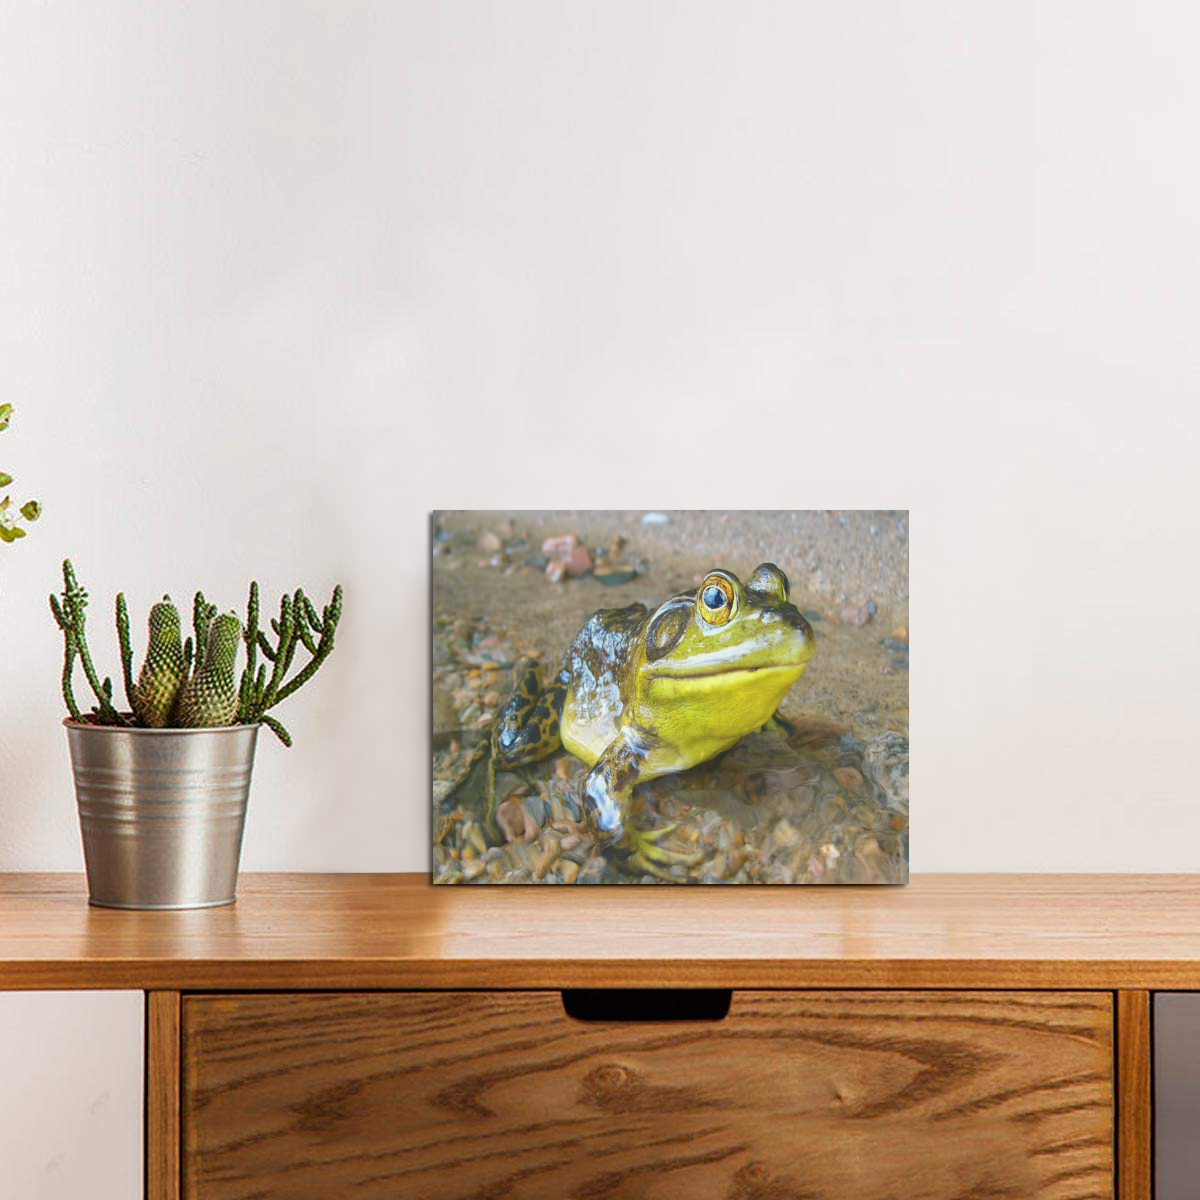 Green Frog Adventure Photo Panel for Tabletop Display 8"x6"